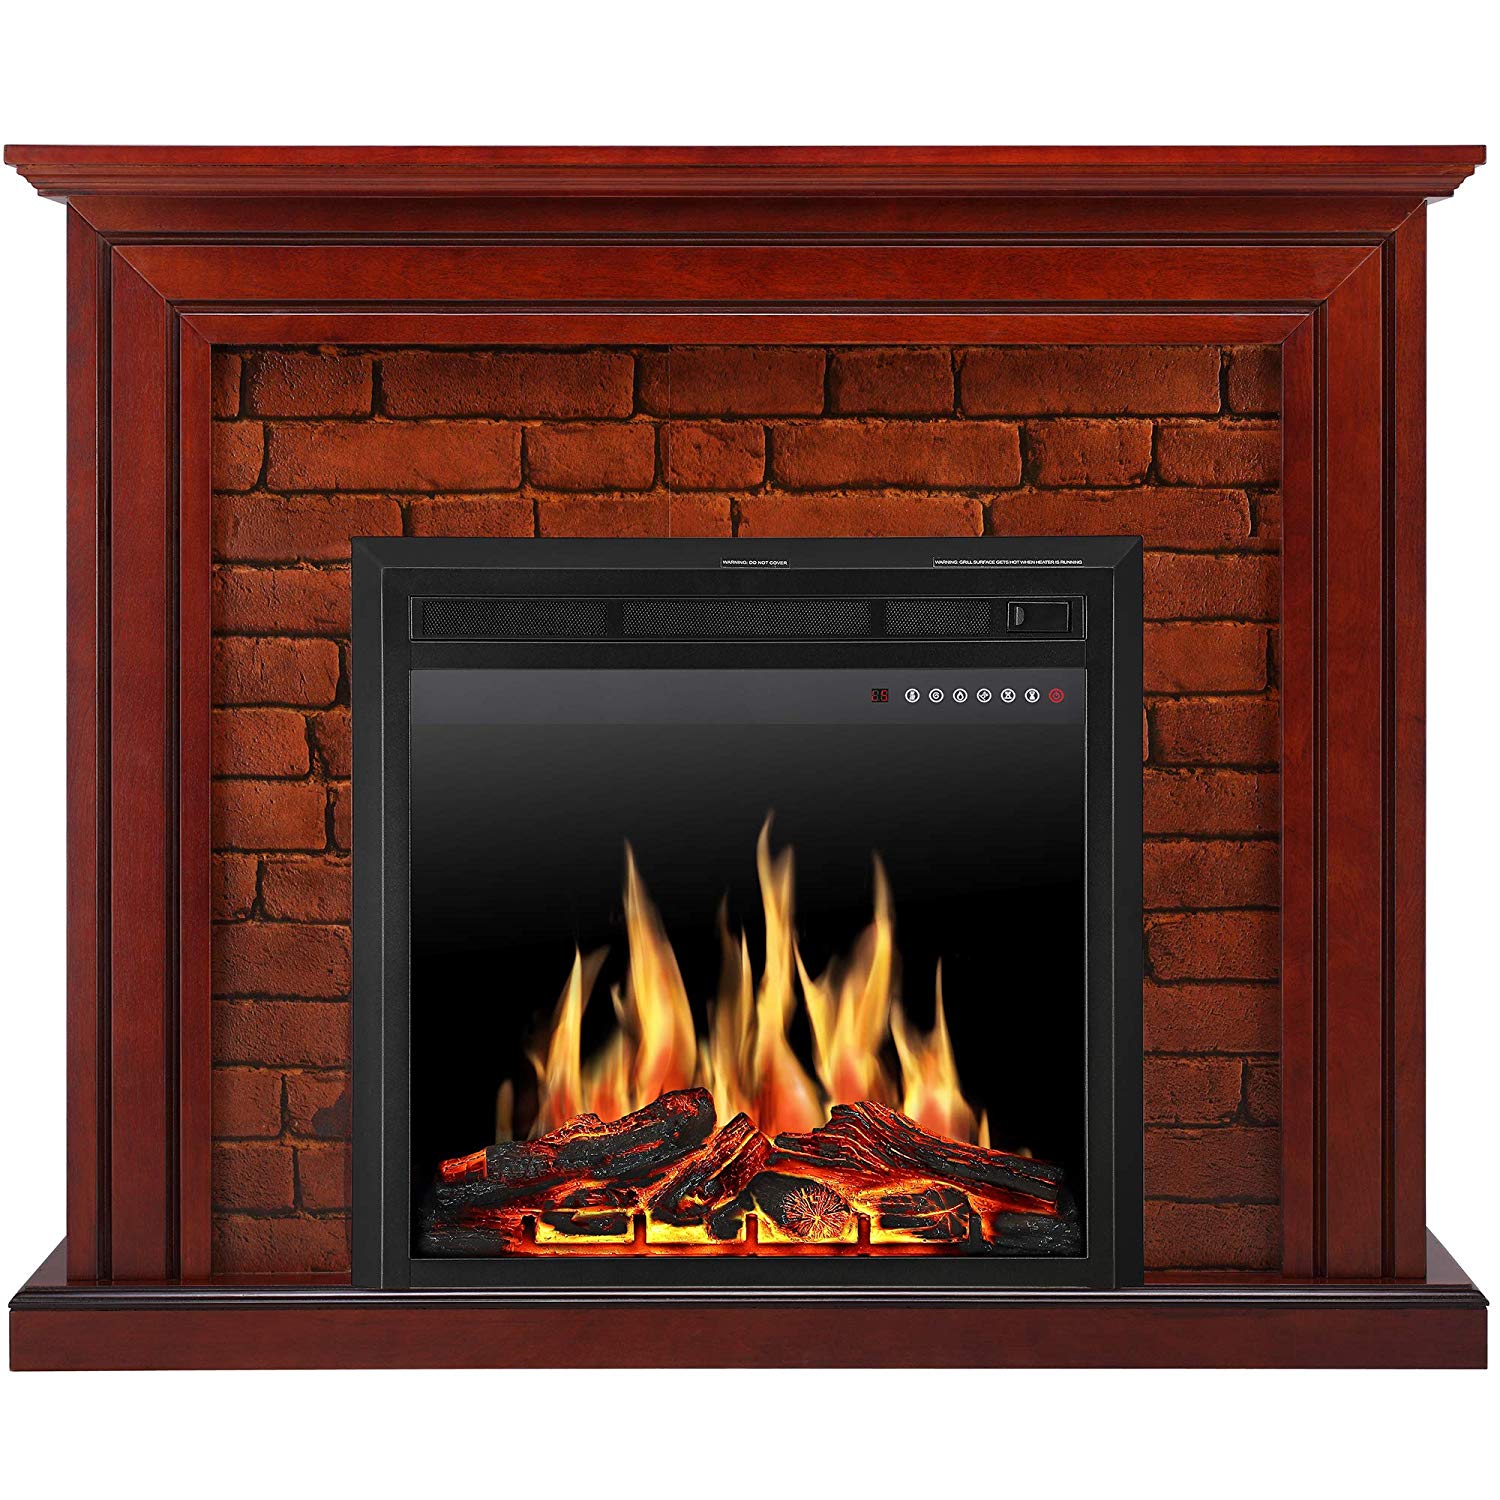 Electric Fireplace Heater Tv Stand Lovely Jamfly Electric Fireplace Mantel Package Traditional Brick Wall Design Heater with Remote Control and Led touch Screen Home Accent Furnishings